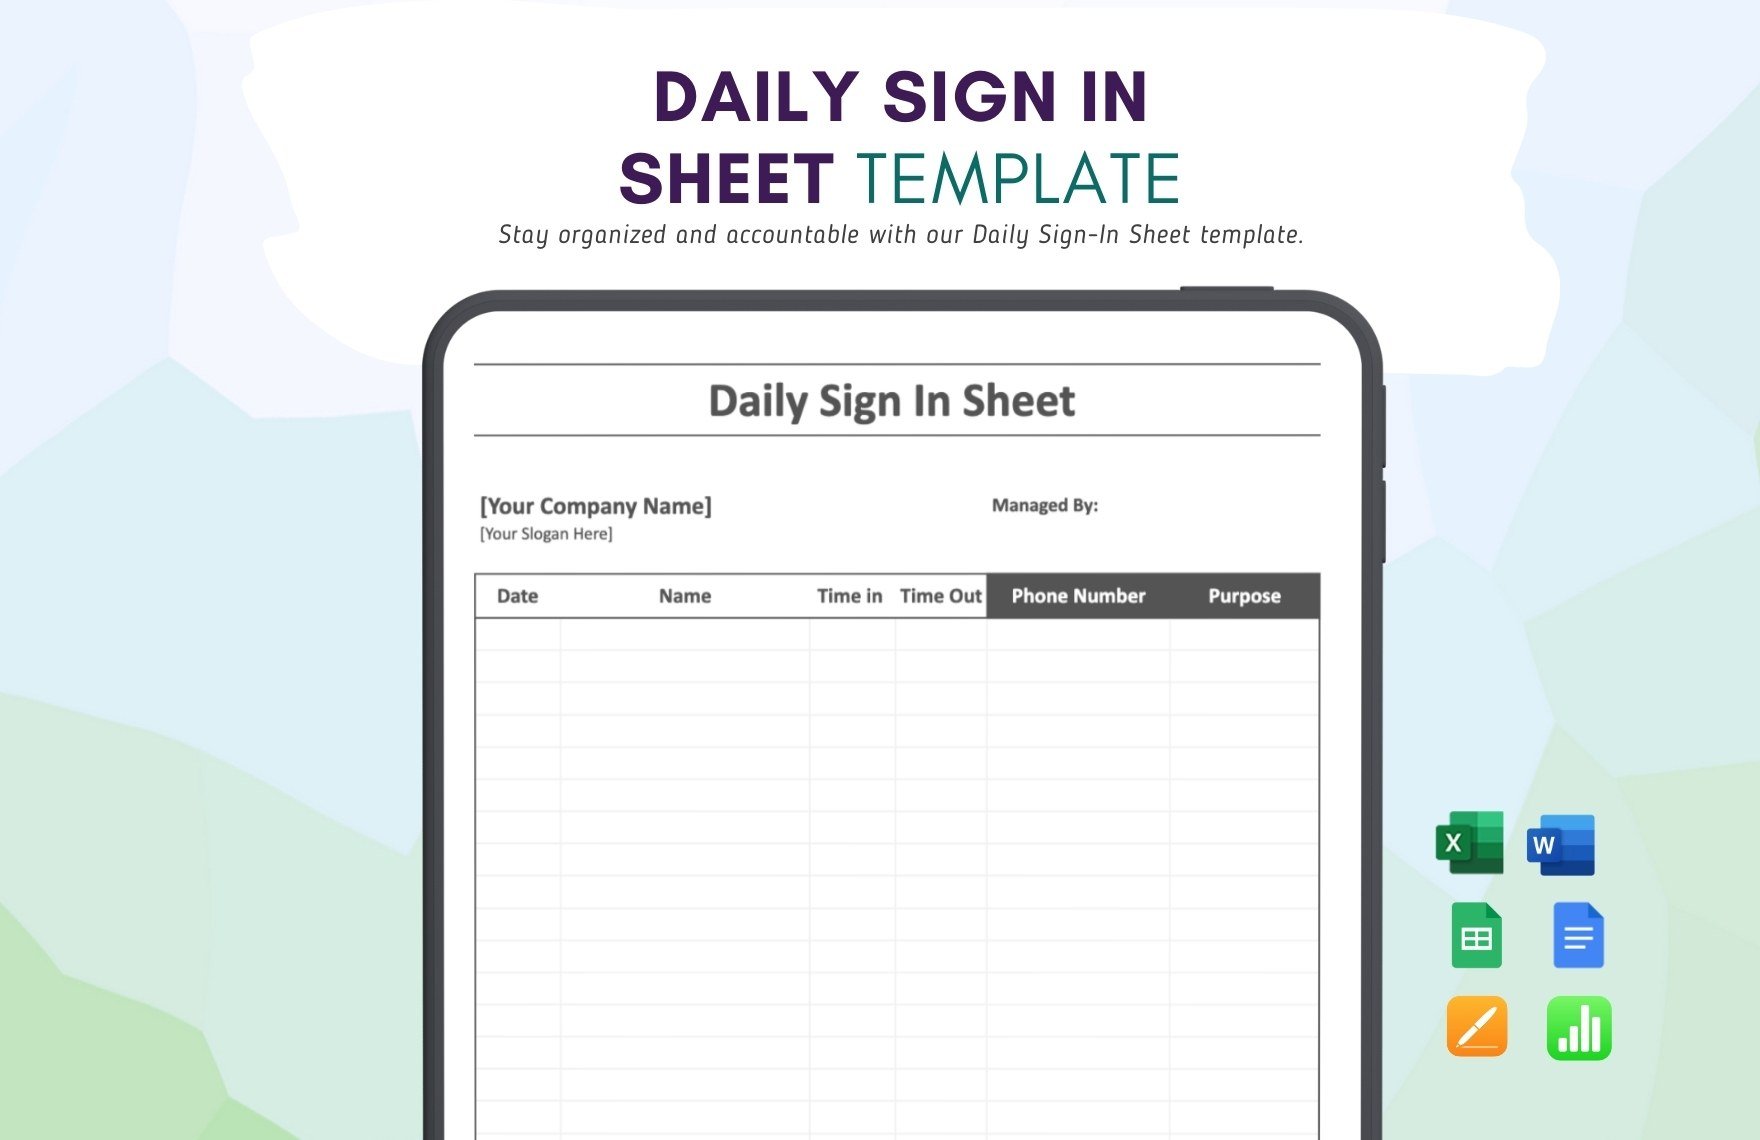 Daily Sign in Sheet Template in Word, Google Docs, Excel, Google Sheets, Apple Pages, Apple Numbers